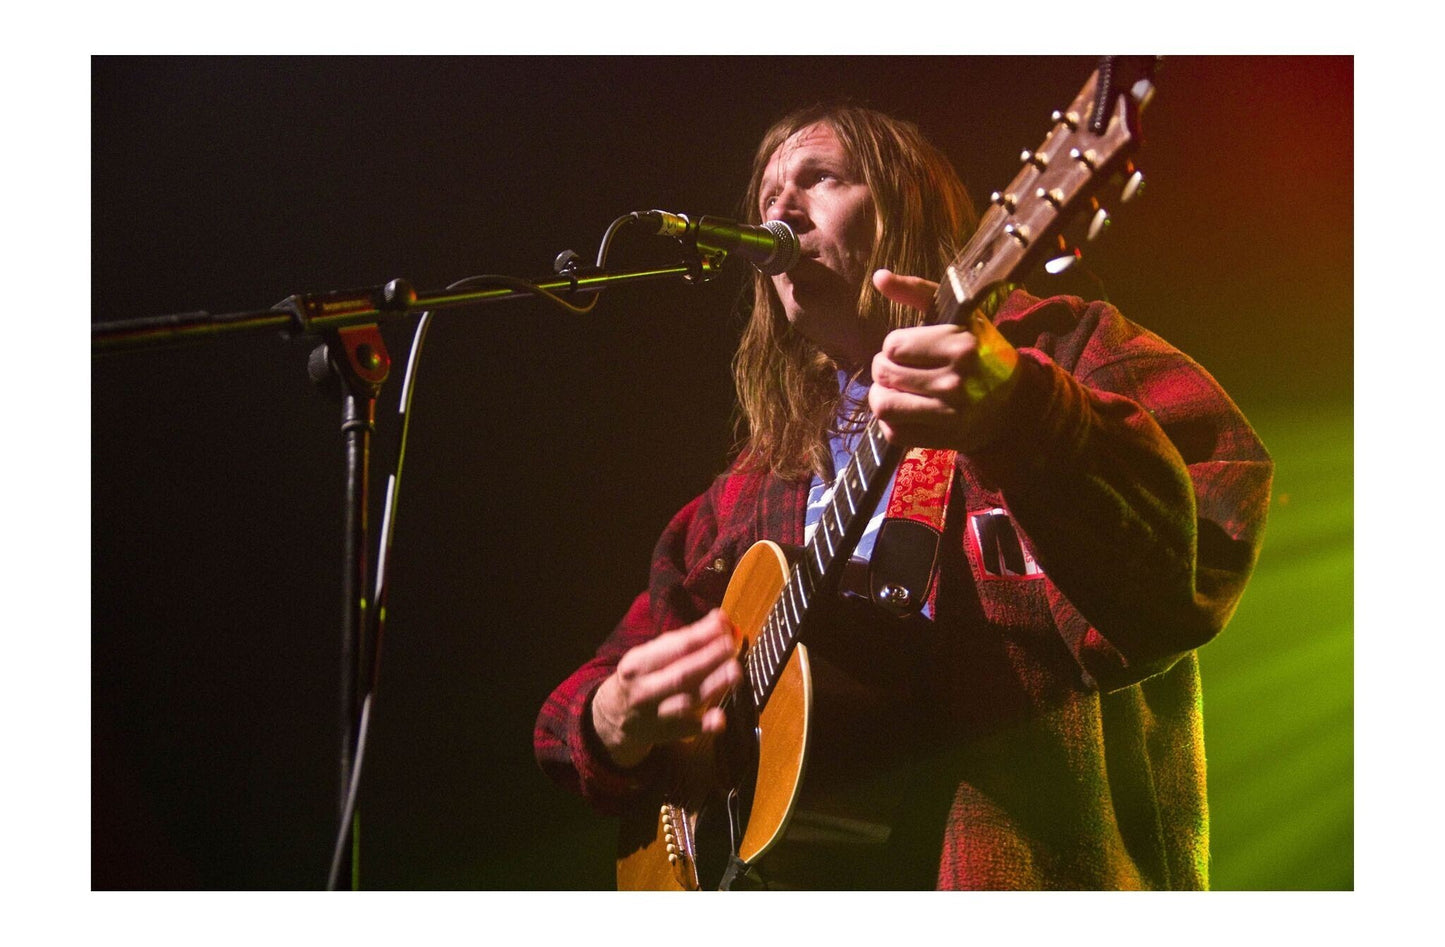 The Lemonheads - Even Dando Playing Guitar and Singing on Stage, England, Print